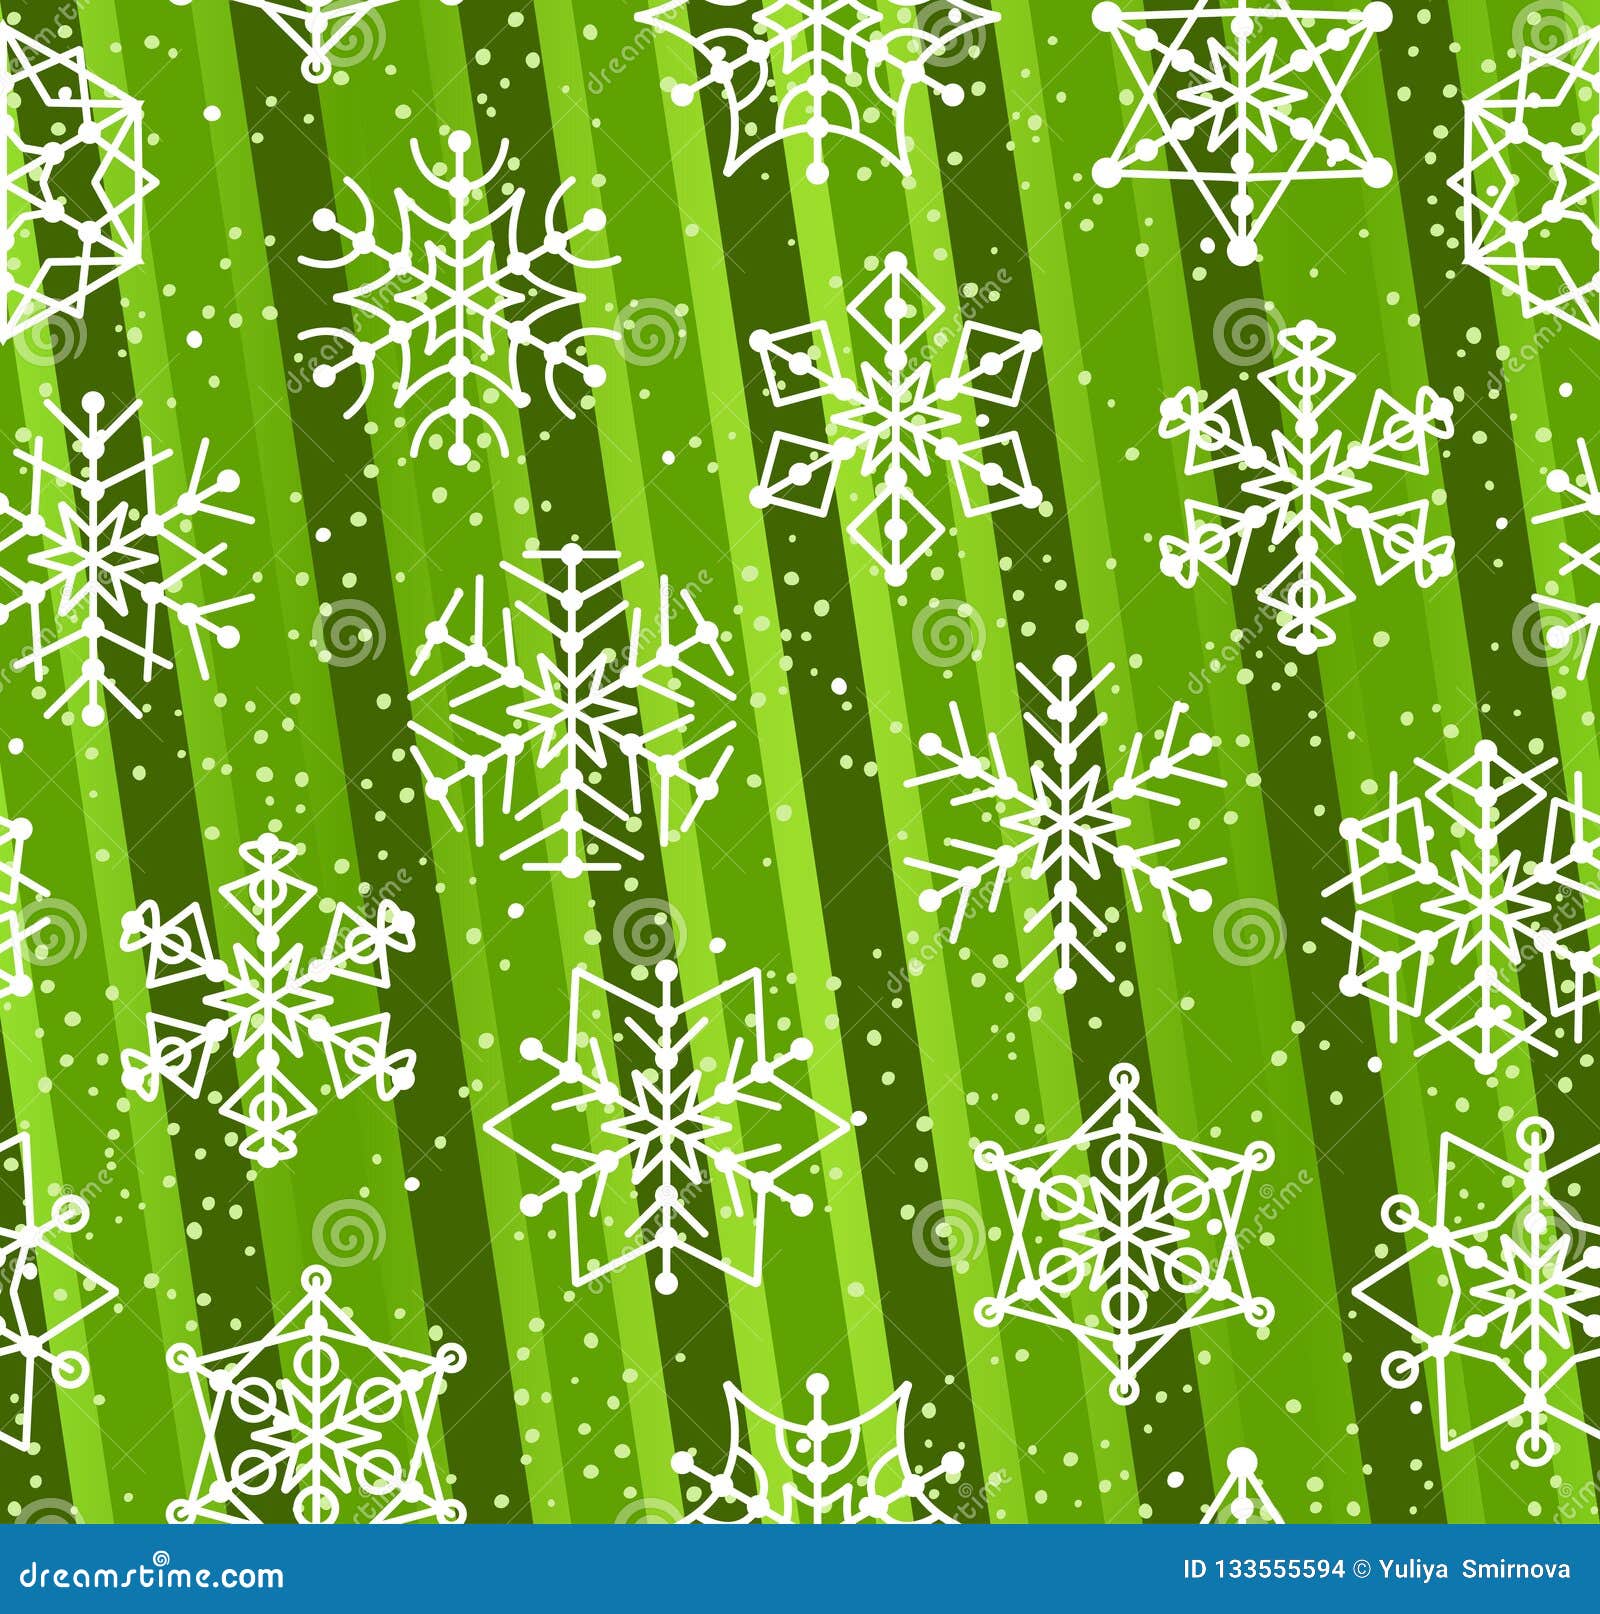 Seamless Christmas Pattern with Snowflakes. Stock Vector - Illustration ...